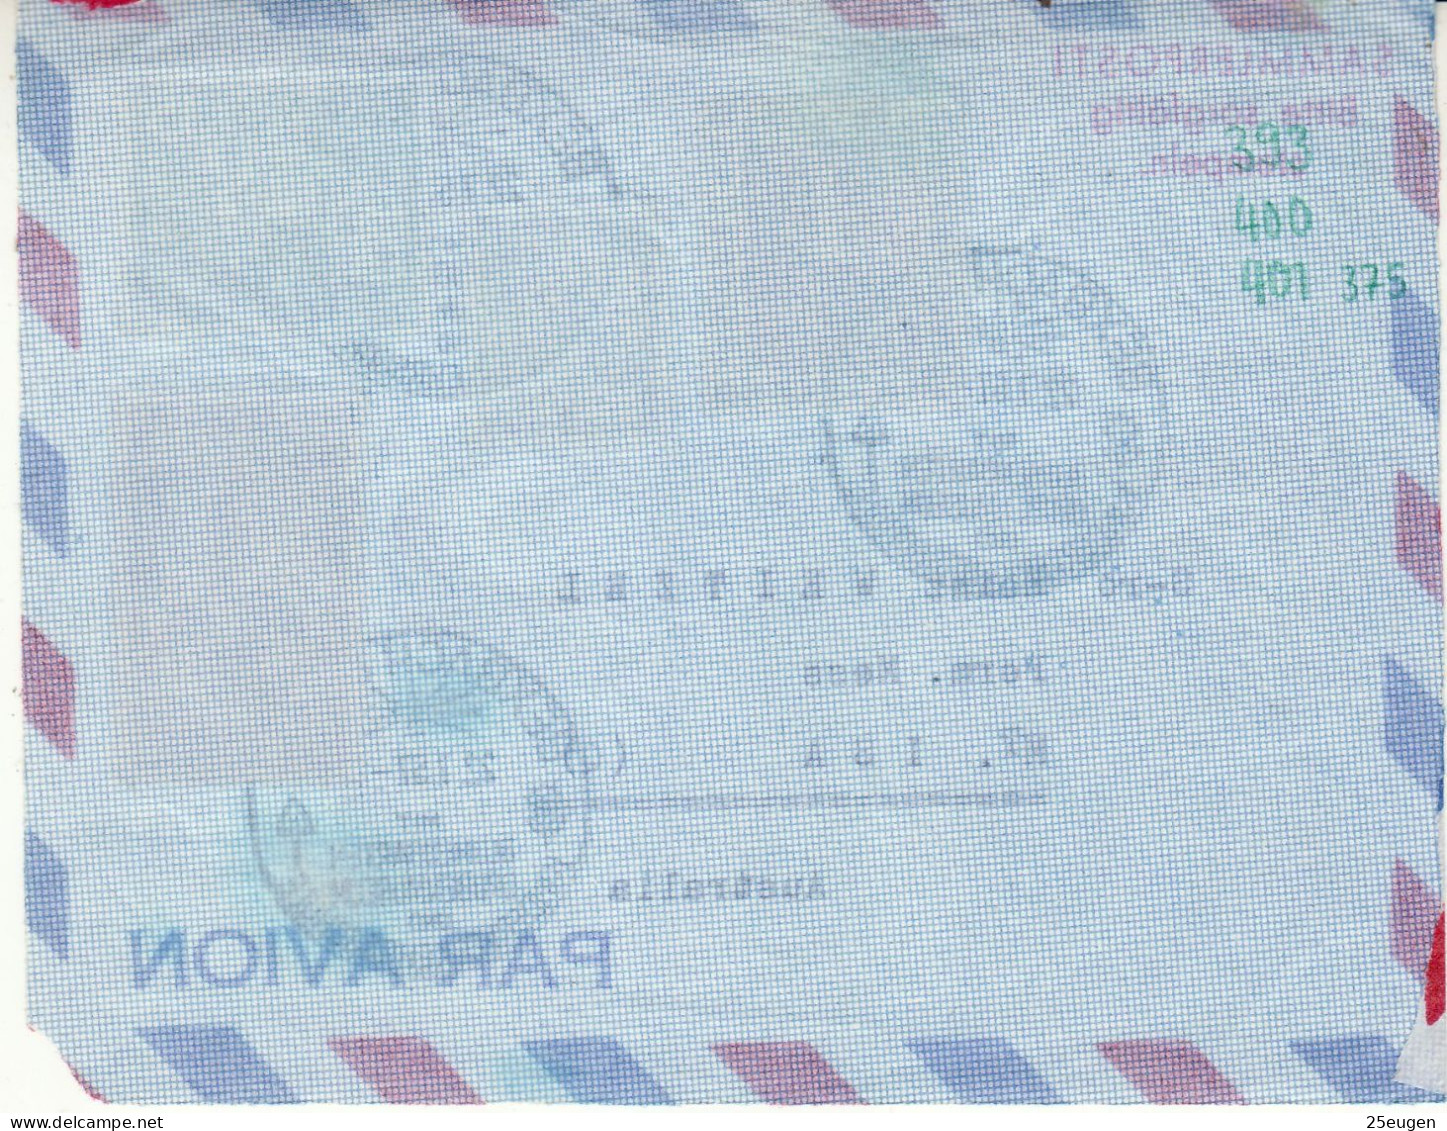 SAAR 1957  LETTER SENT FROM BEXBACH TO Mt.ISA AUSTRALIA /PIECE OF COVER/ - Lettres & Documents